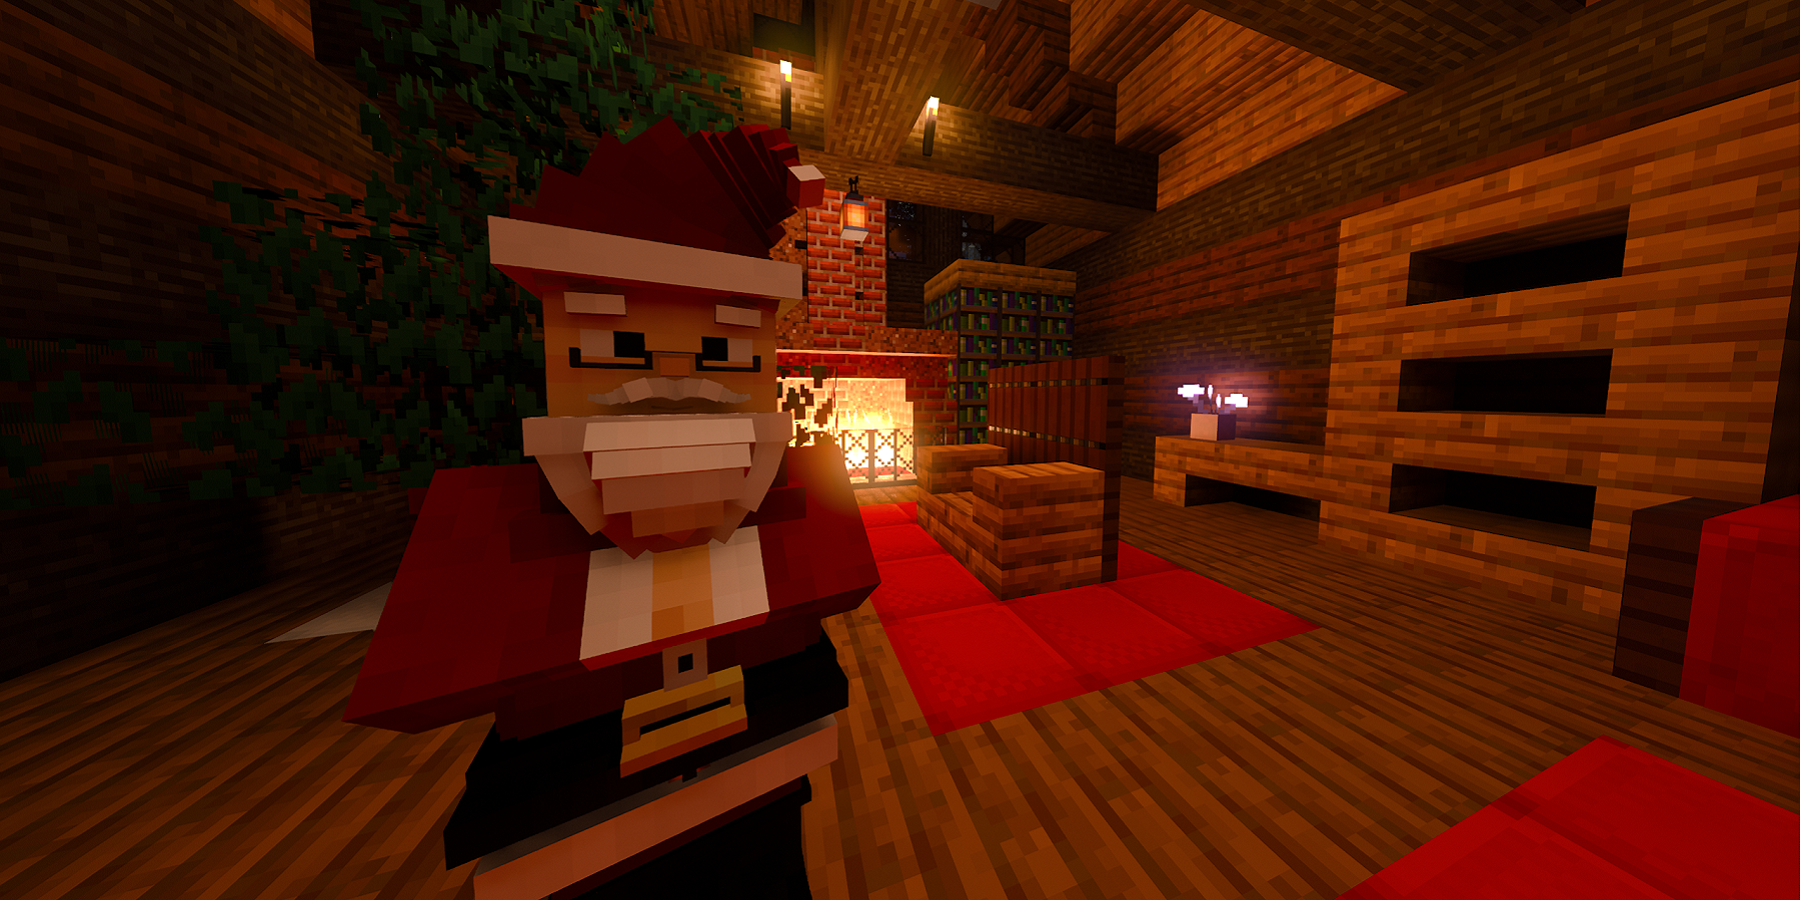 Screenshot from Minecraft running Nvidia RTX, which shows a blocky Santa Claus inside a log cabin.